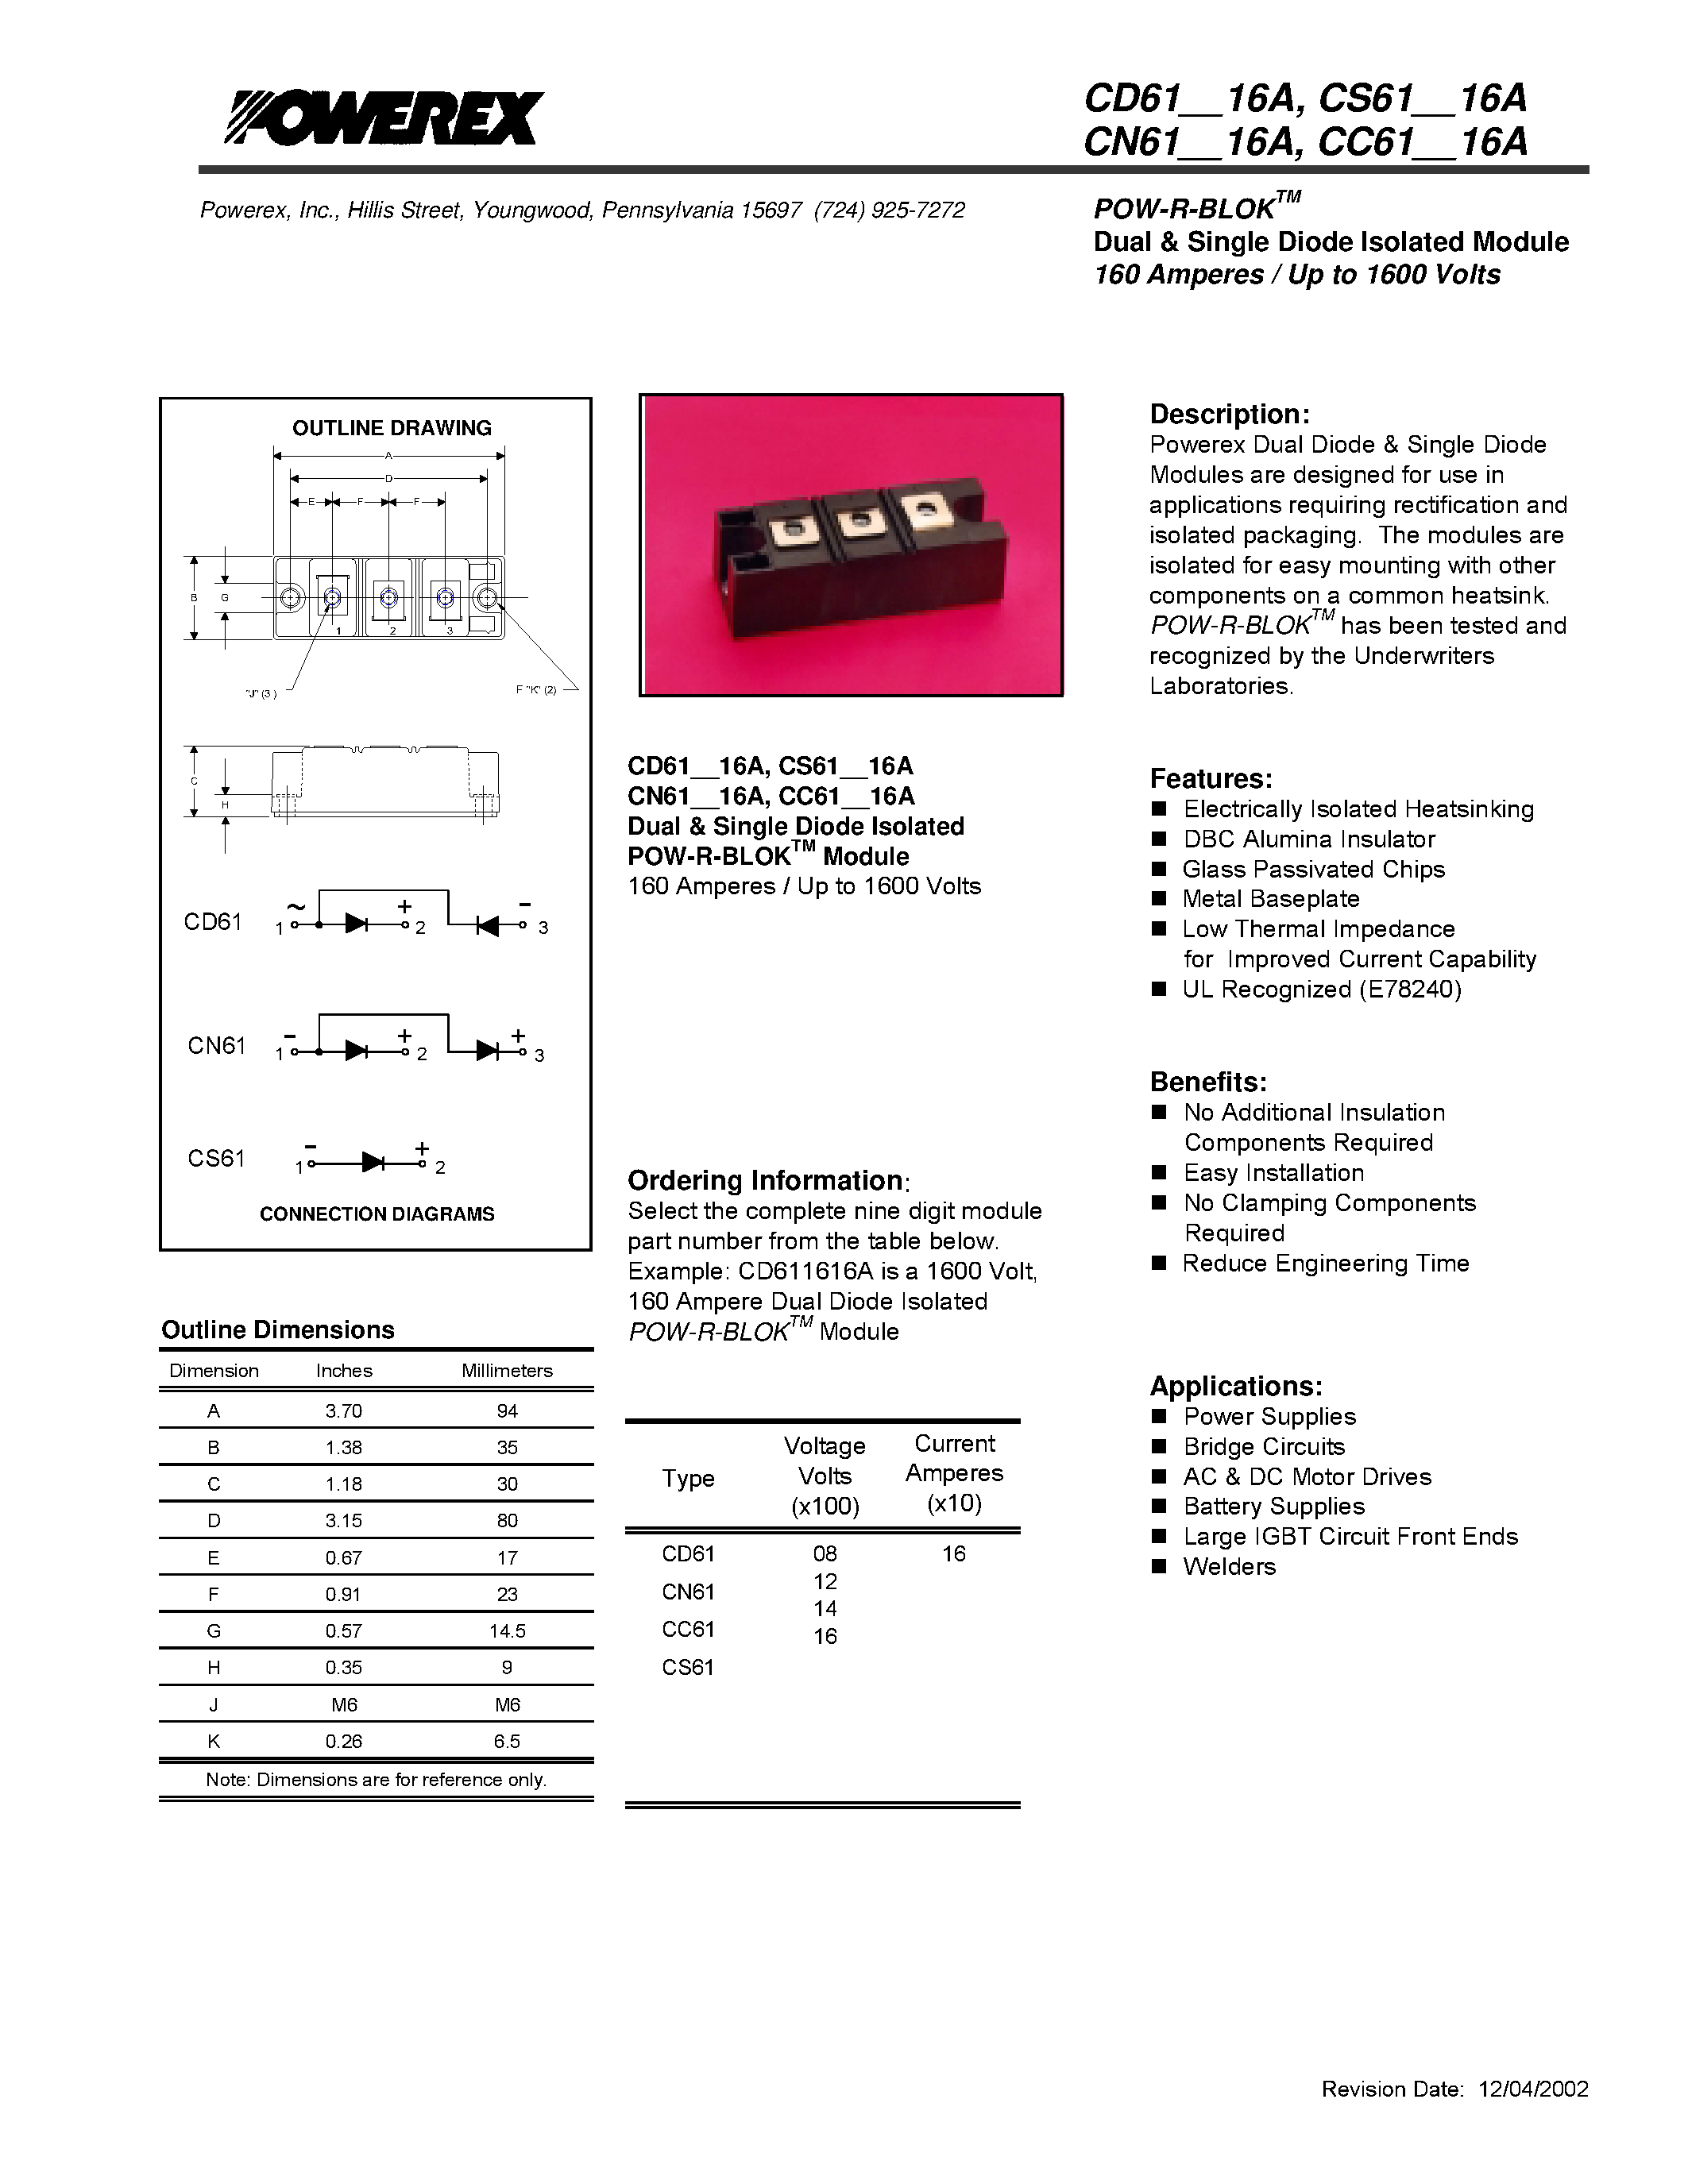 Даташит CD61 - POW-R-BLOK Dual & Single Diode Isolated Module 160 Amperes / Up to 1600 Volts страница 1